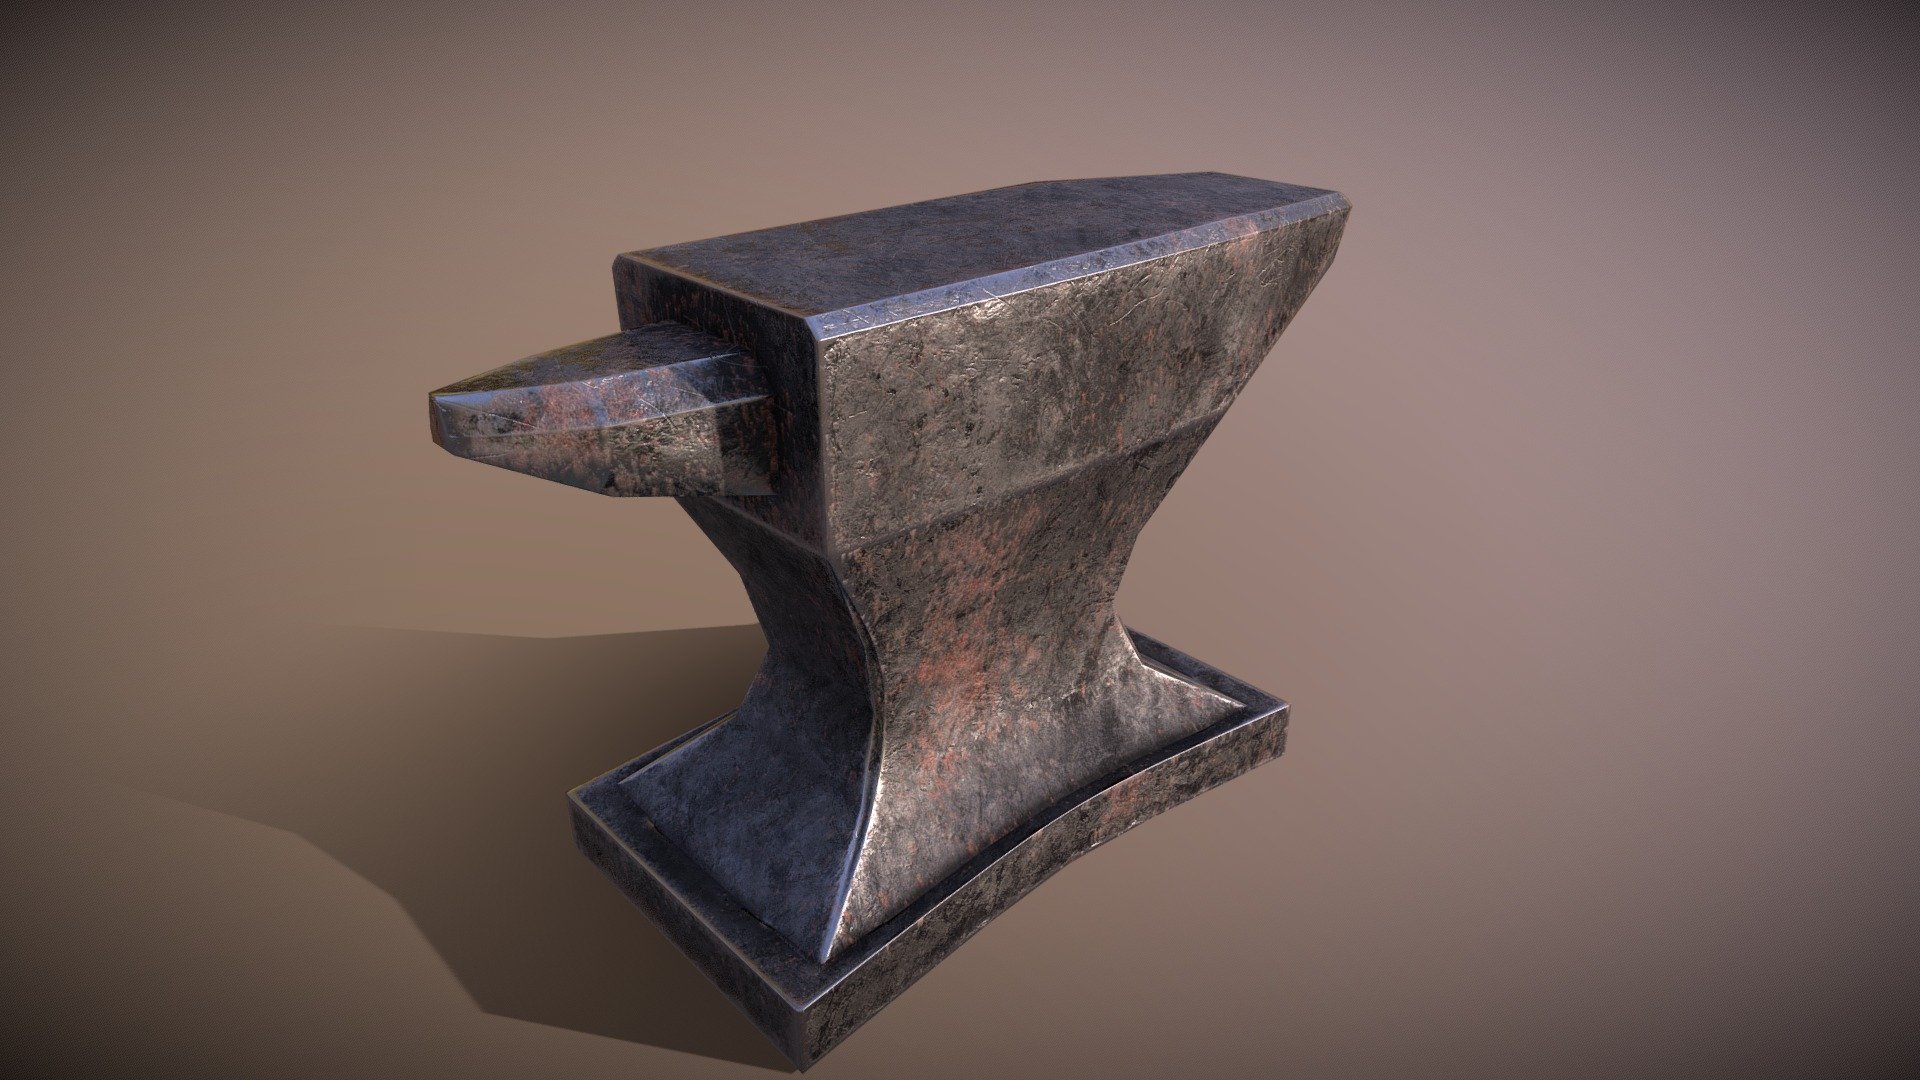 ANVIL download the new